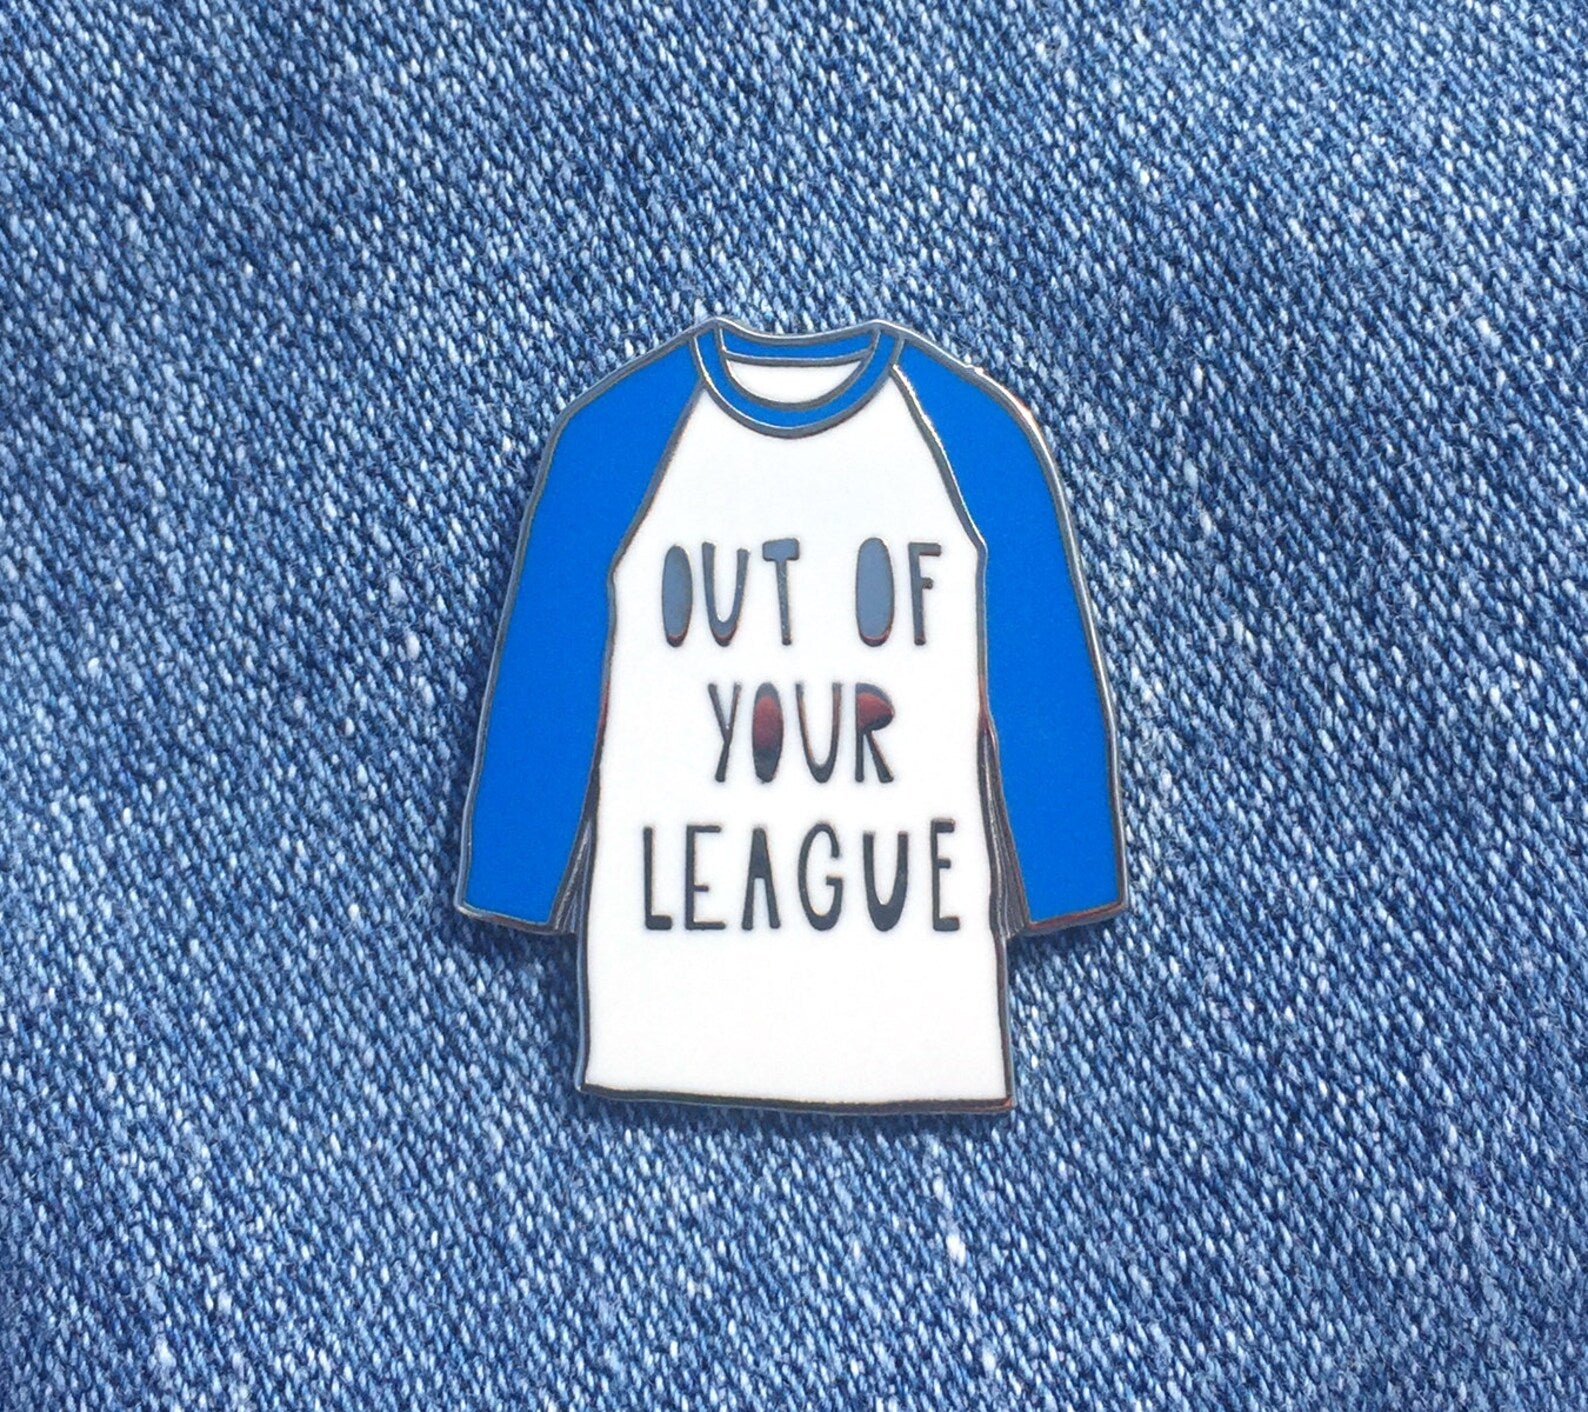 Near Modern Disaster “Out of your League” Pin